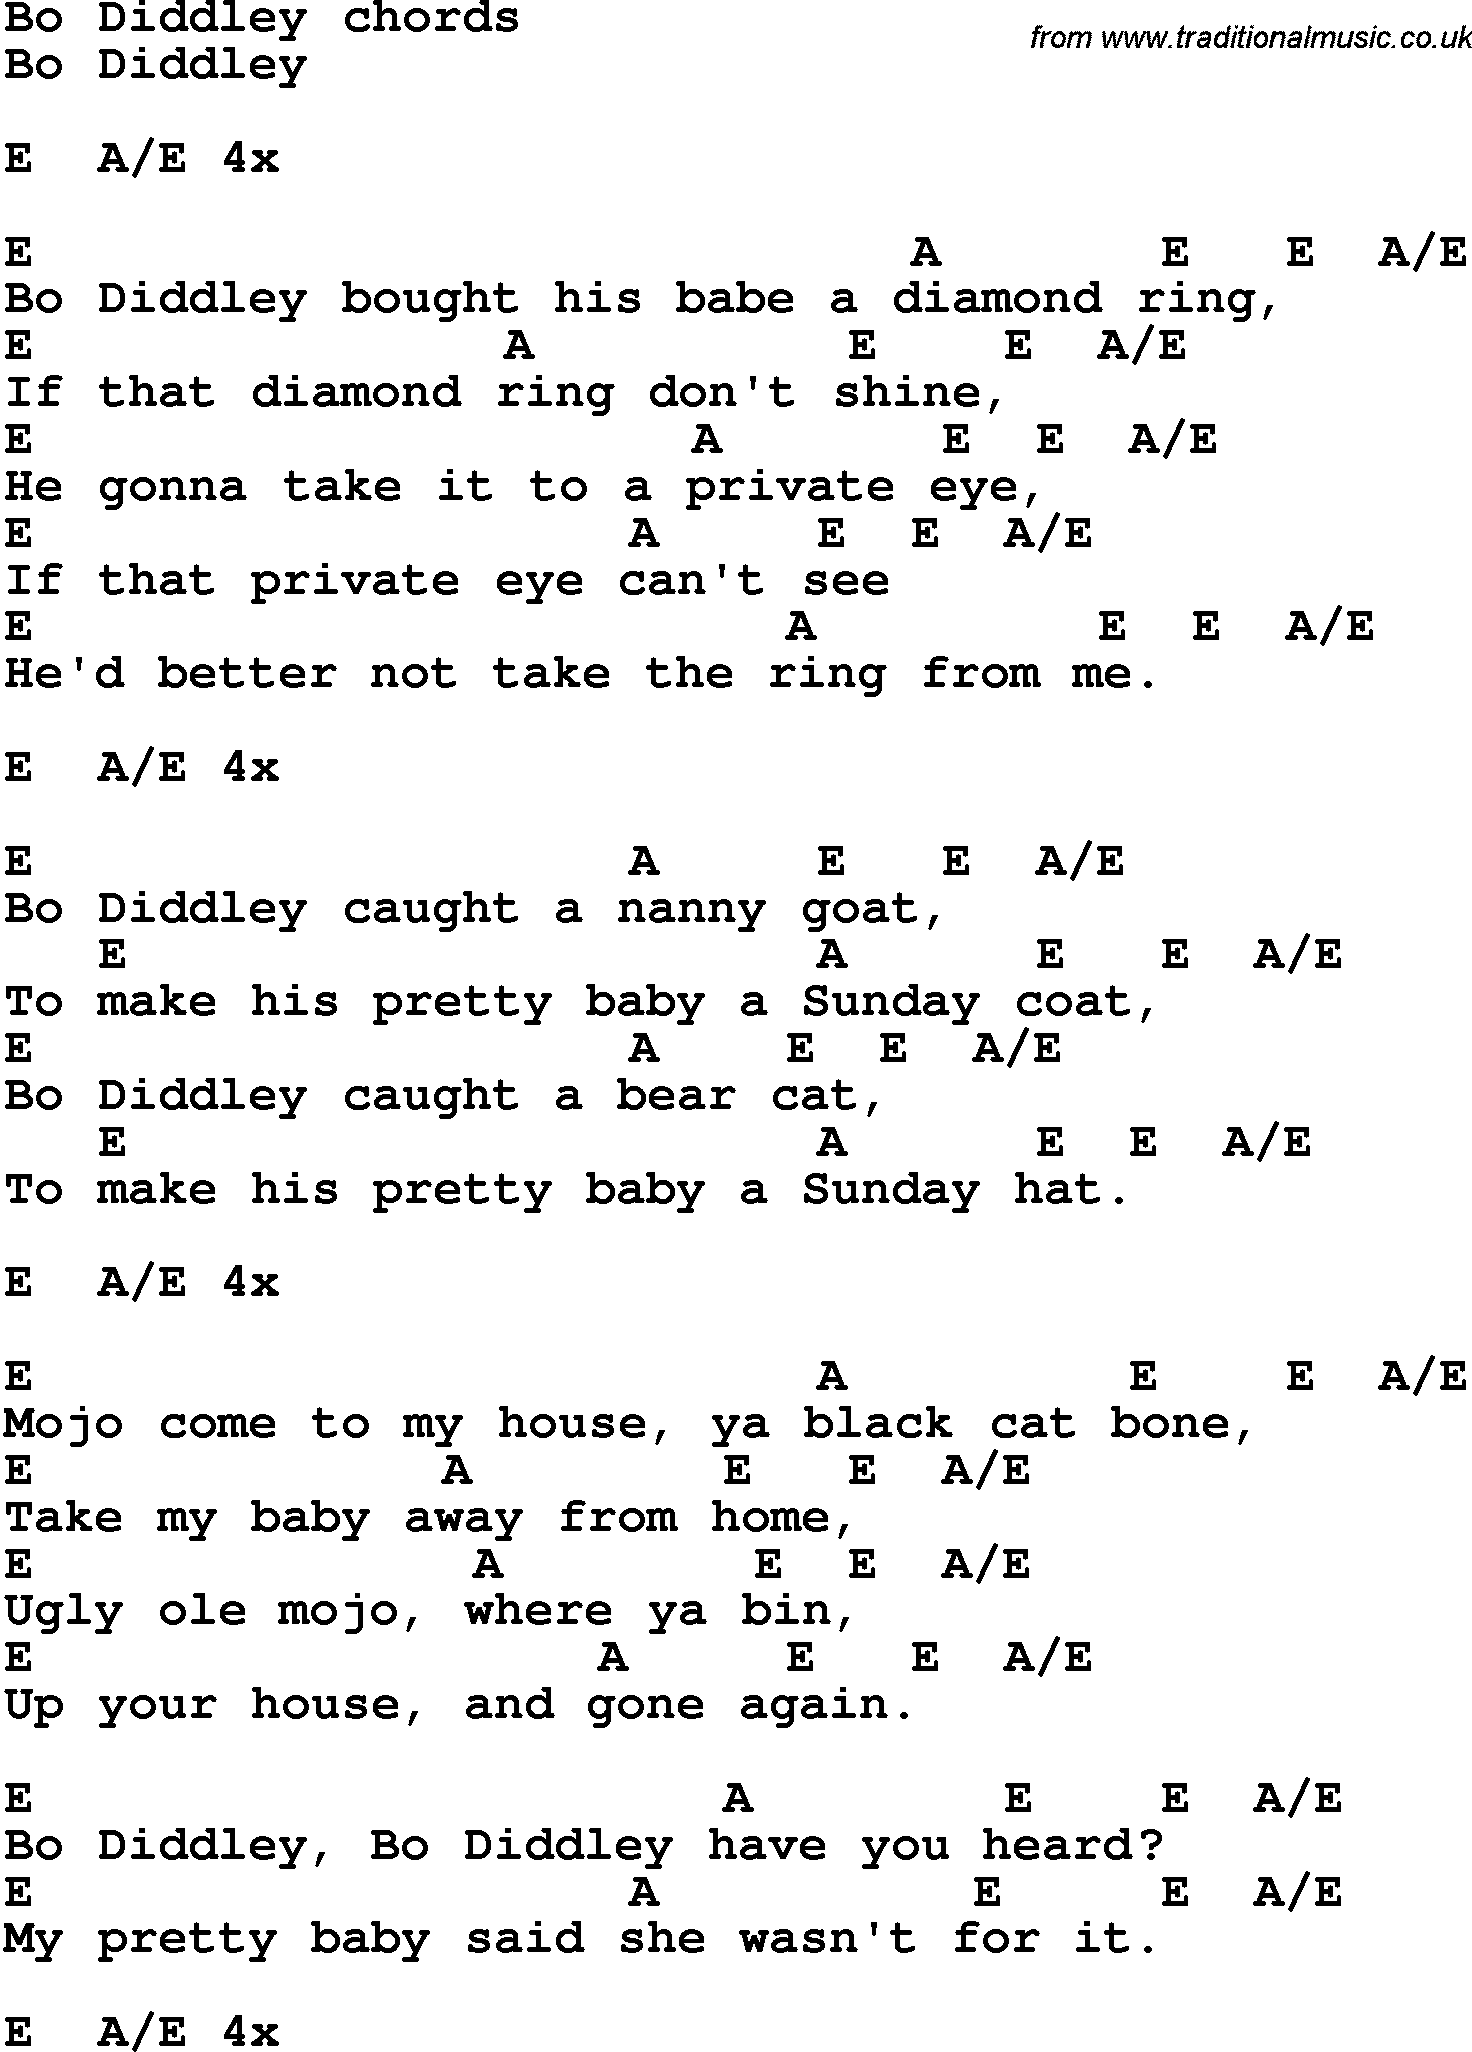 Song Lyrics with guitar chords for Bo Diddley